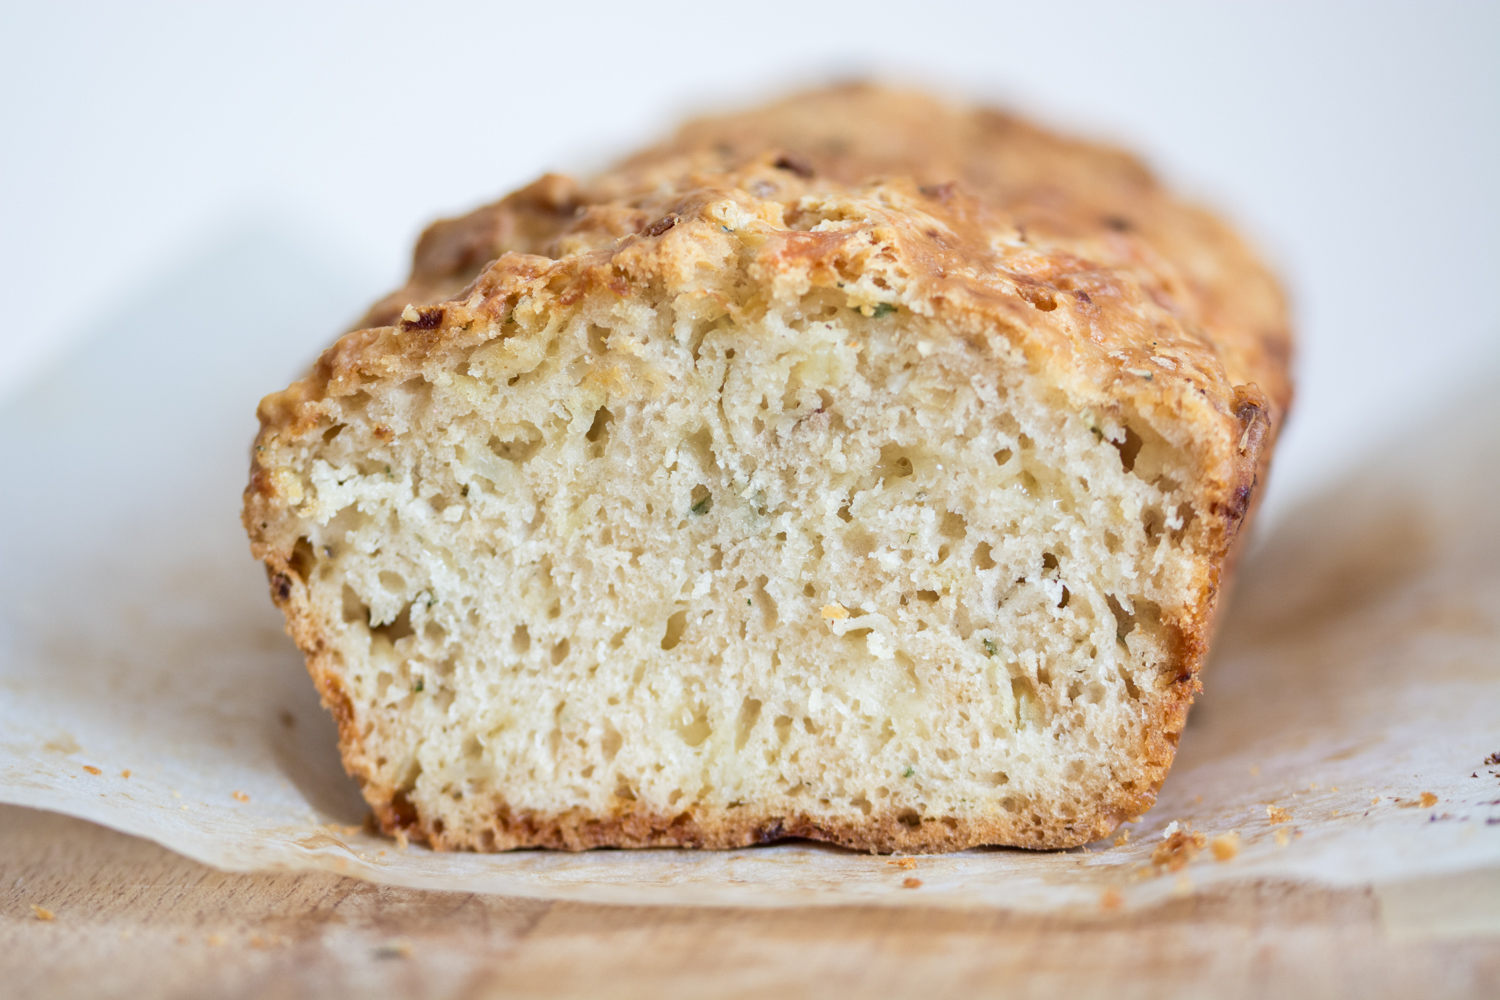 Cheese & beer bread